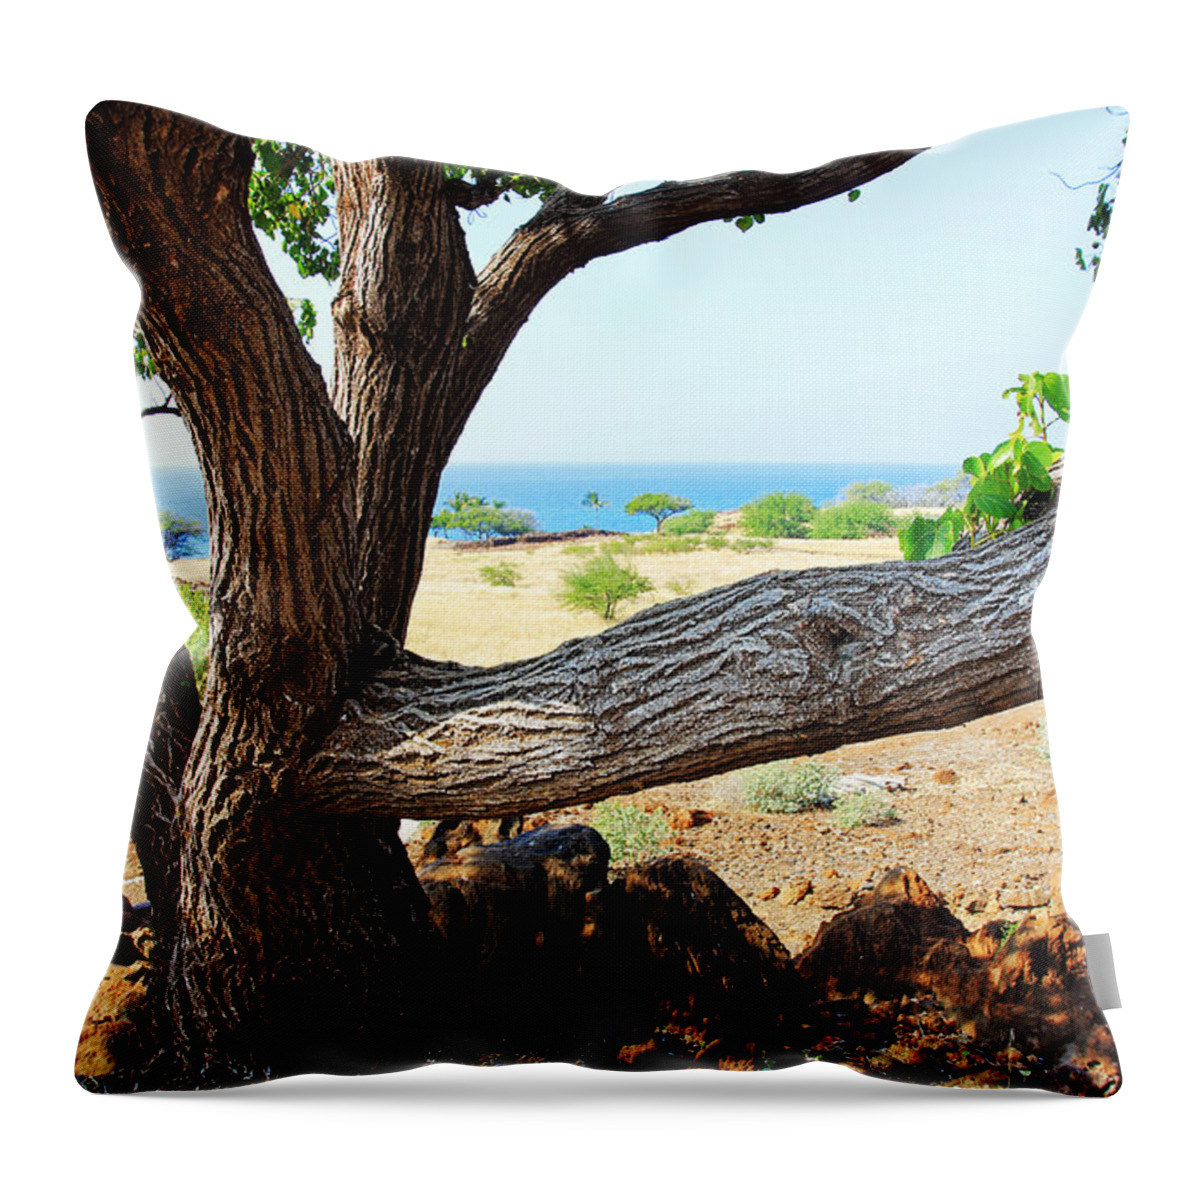 Lapakahi View Throw Pillow featuring the photograph Lapakahi View by Jennifer Robin